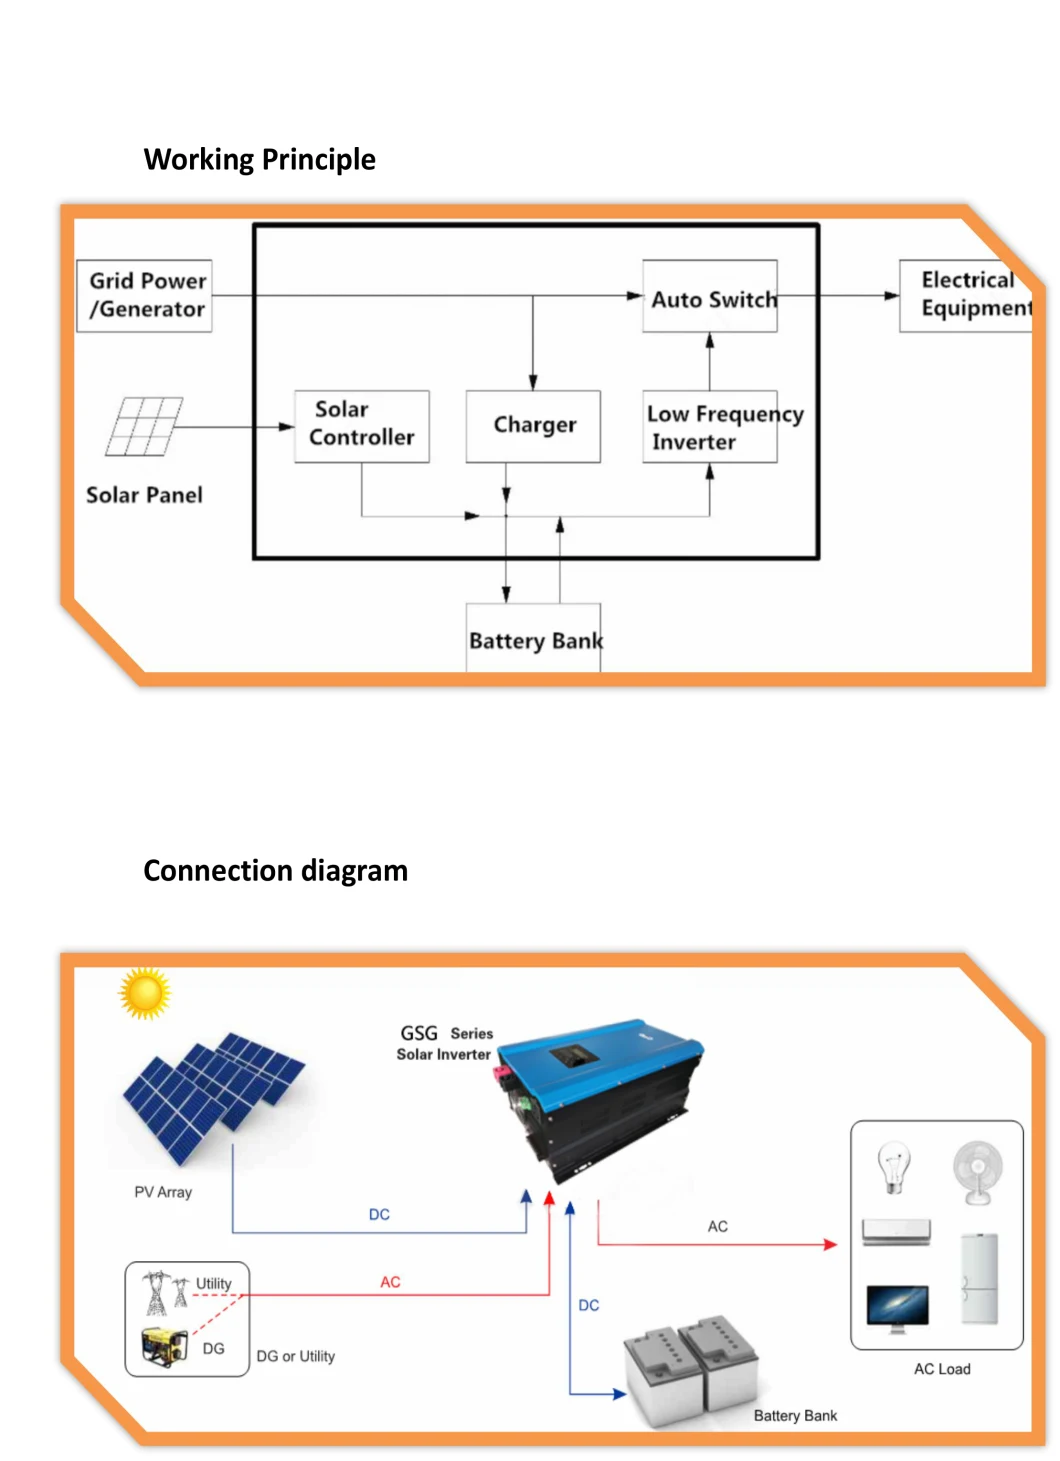 3kw Solar Inverter with Built-in MPPT Controller 60A